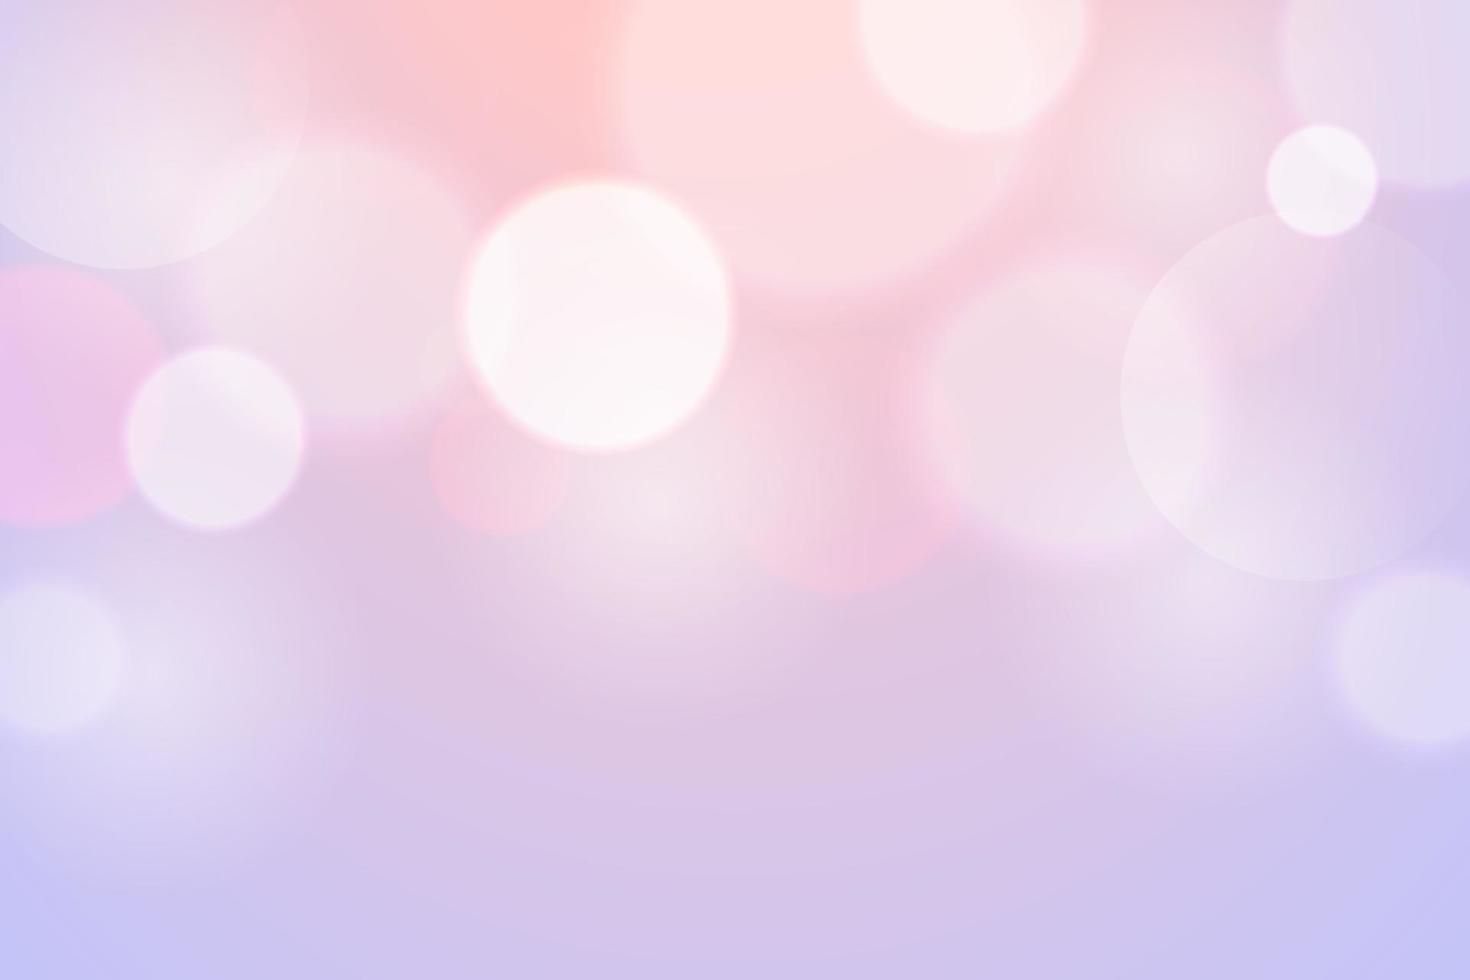 Abstract purple and pink bokeh background. Soft blur light effect wallpaper. Dreamy vector backdrop with copy space for text. Party pastel lovely bubble bokeh background